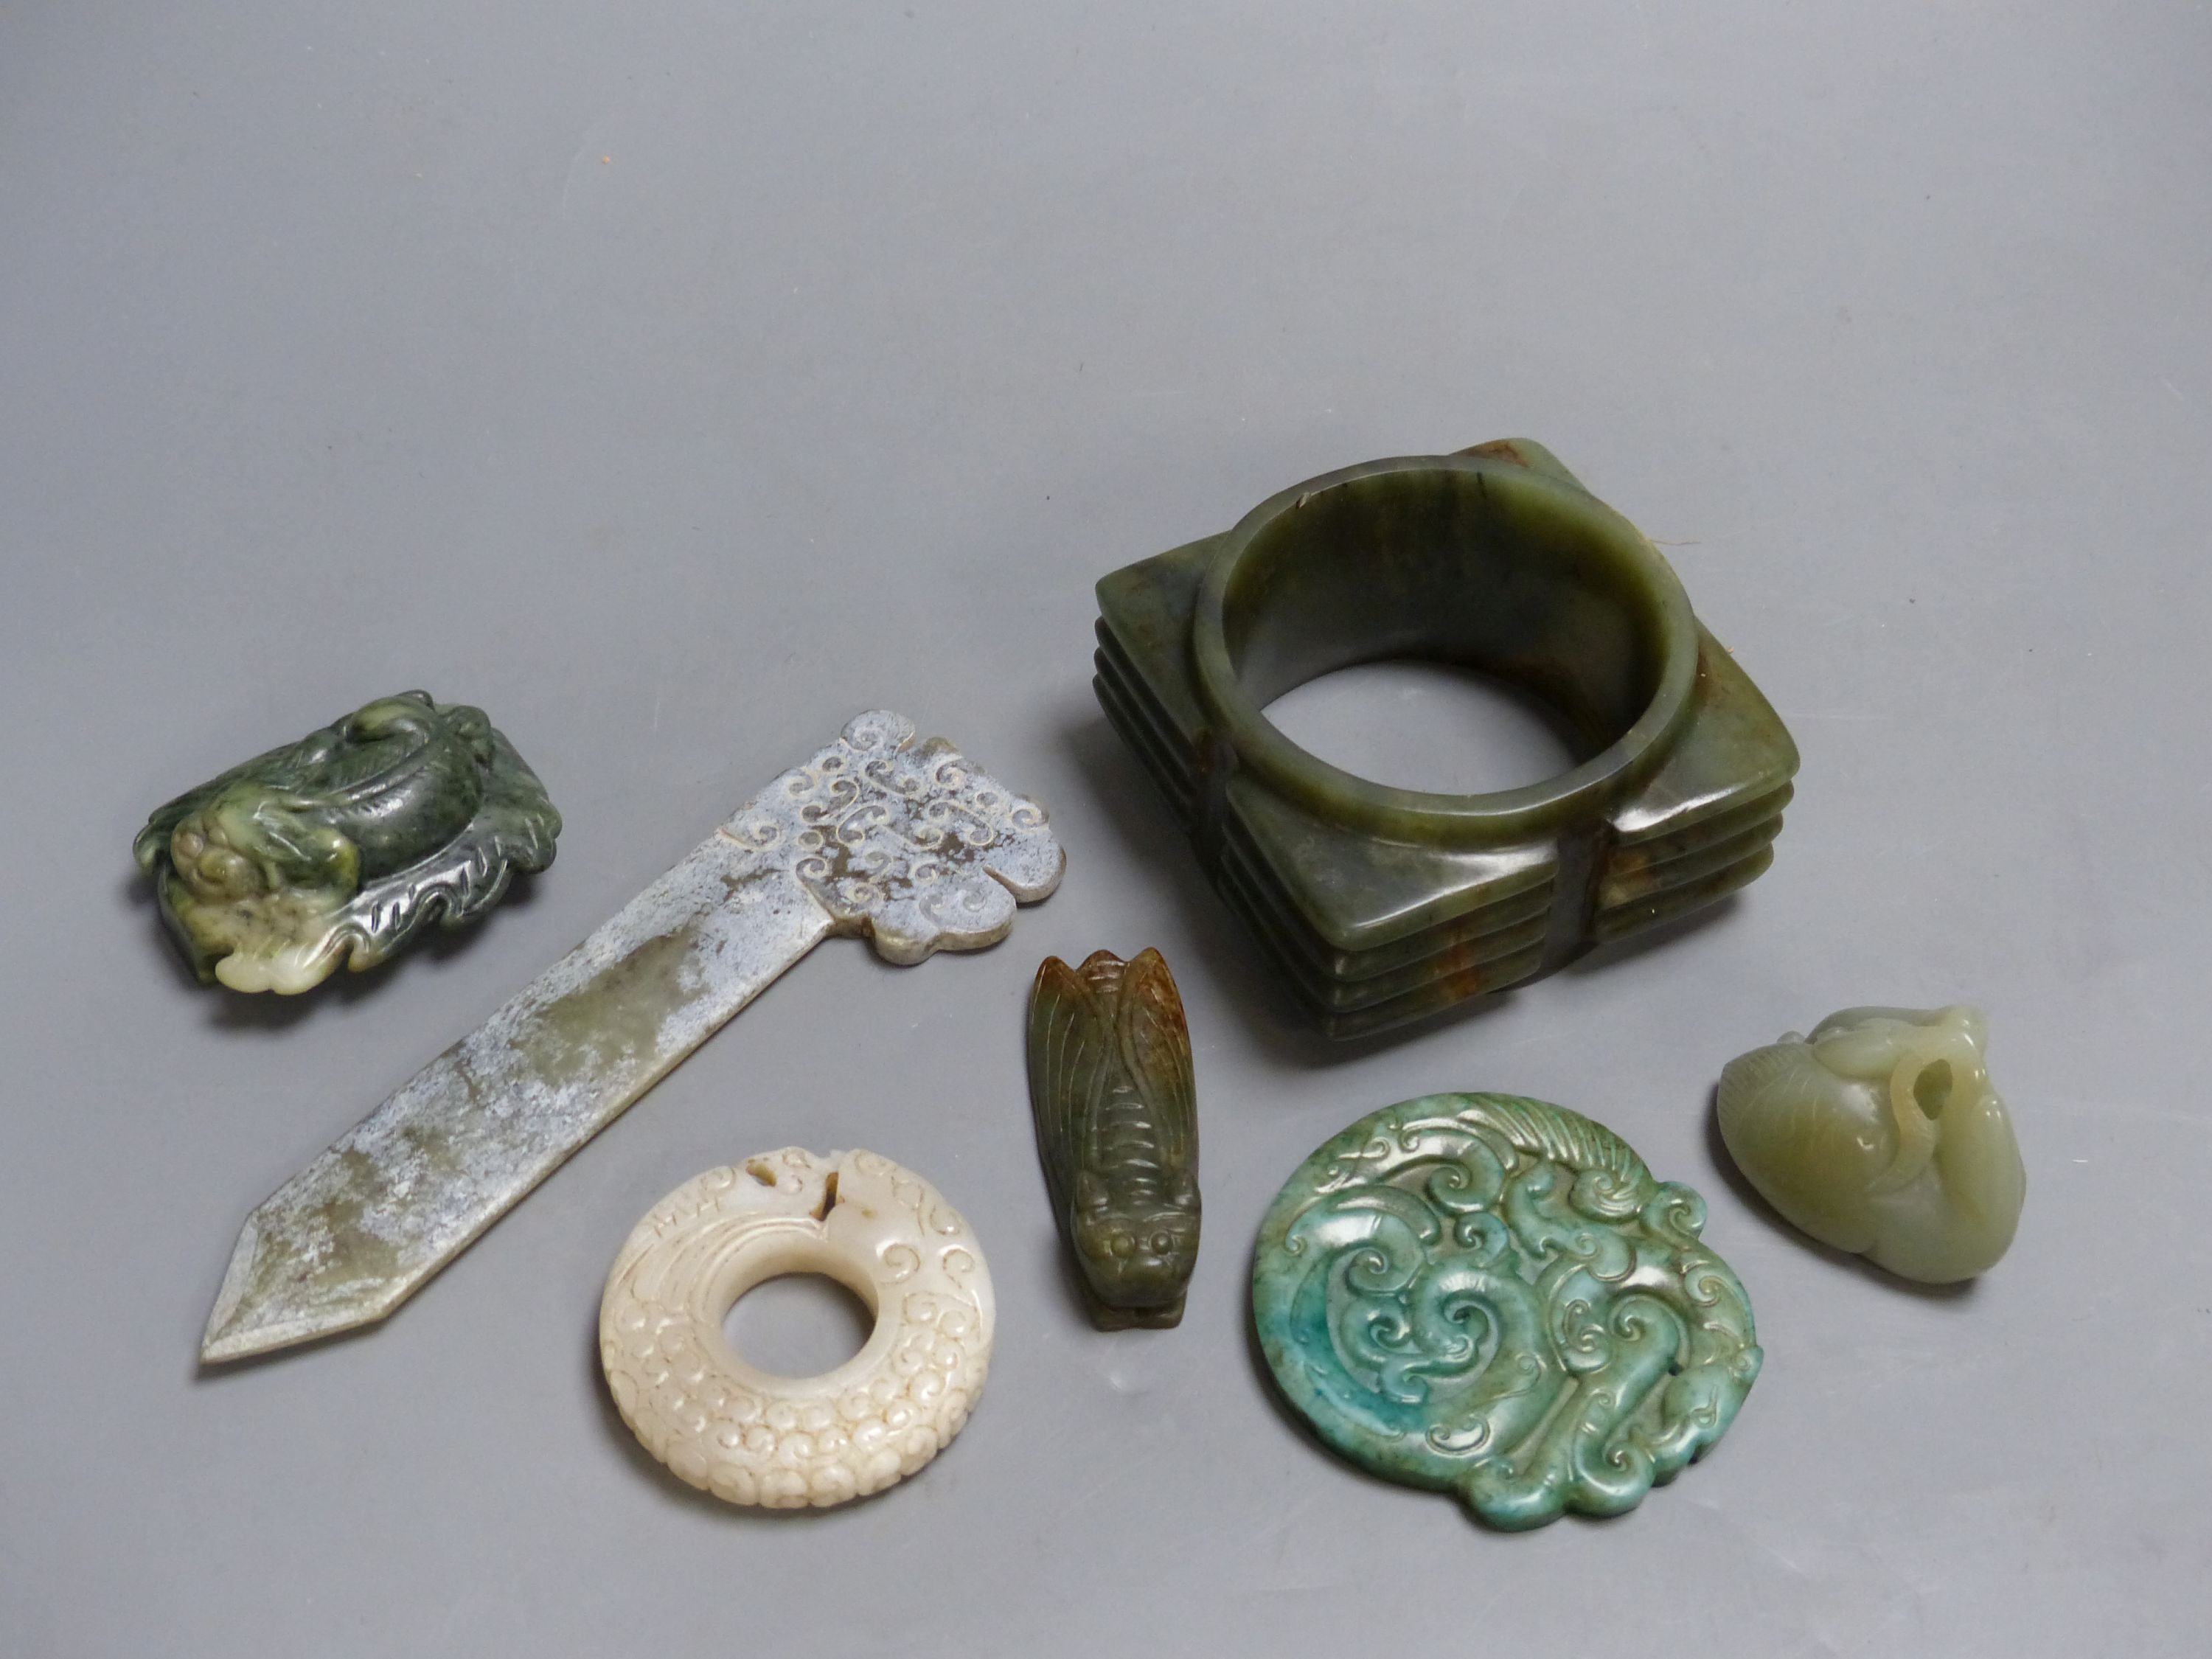 Seven Chinese jade or hardstone carvings, largest 15.5 cm